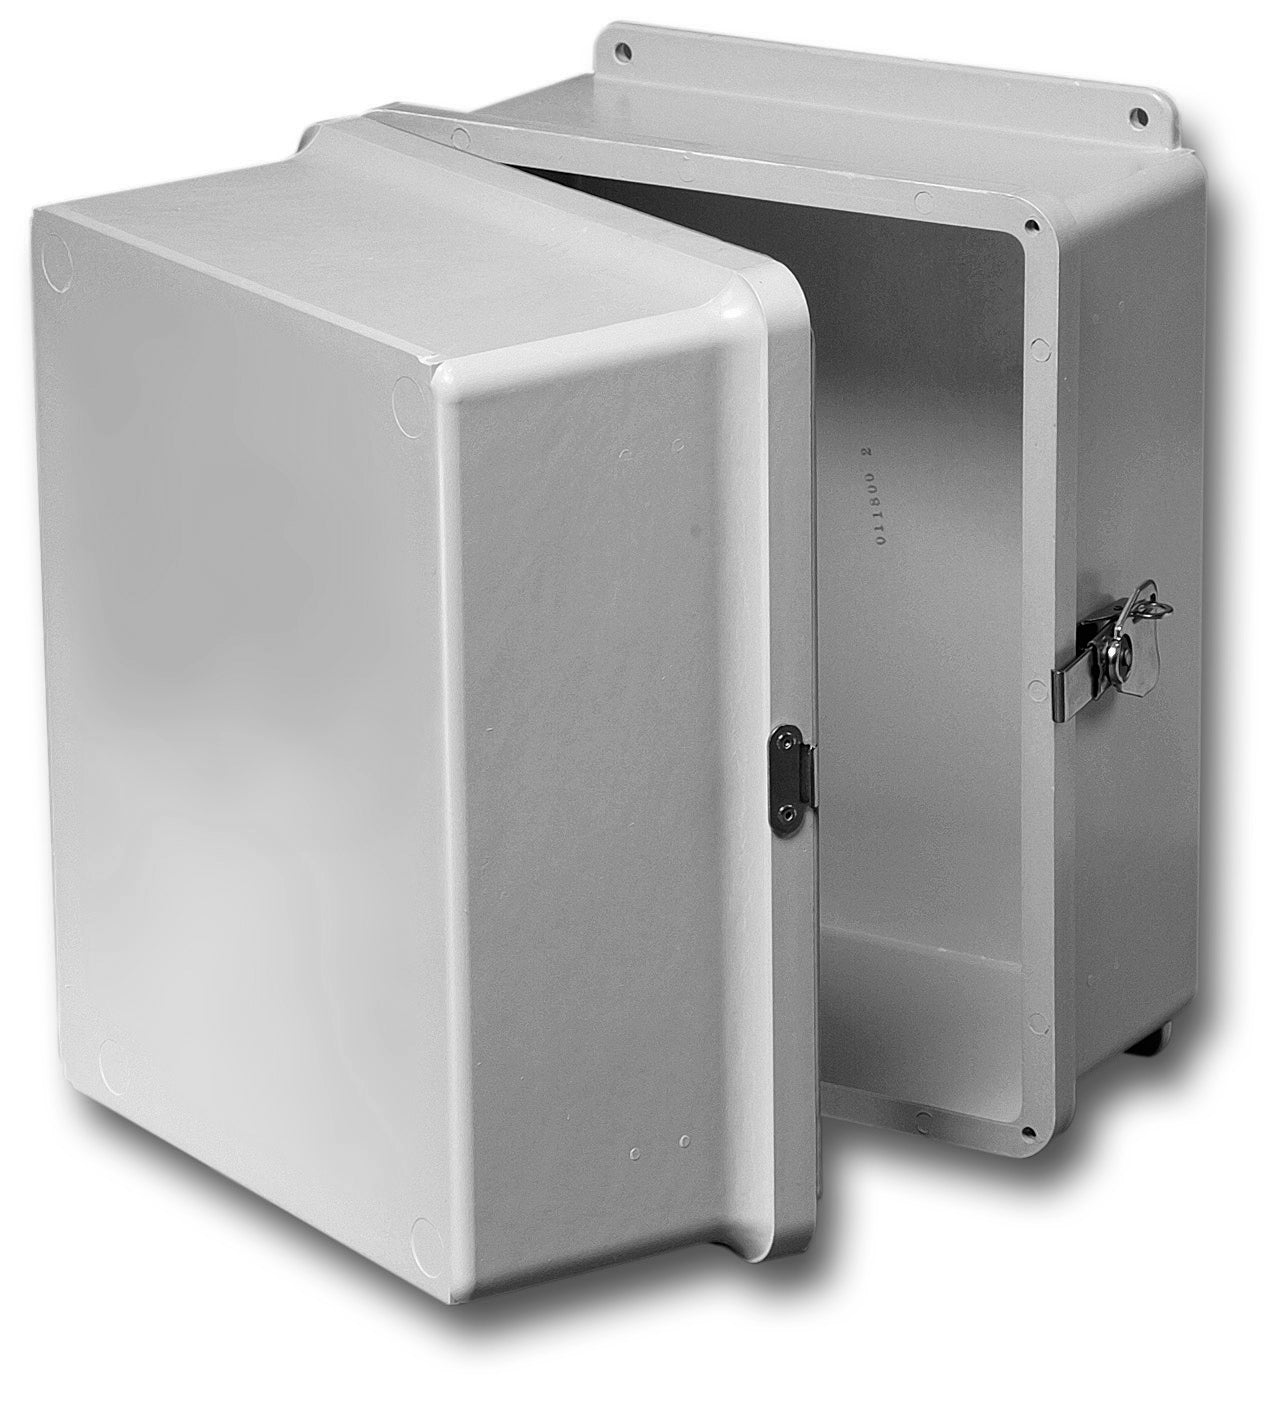 N4X   FG   XD Series     Fiberglass Enclosures with Extra Depth and Hinged Cover     Includes Twist Latch